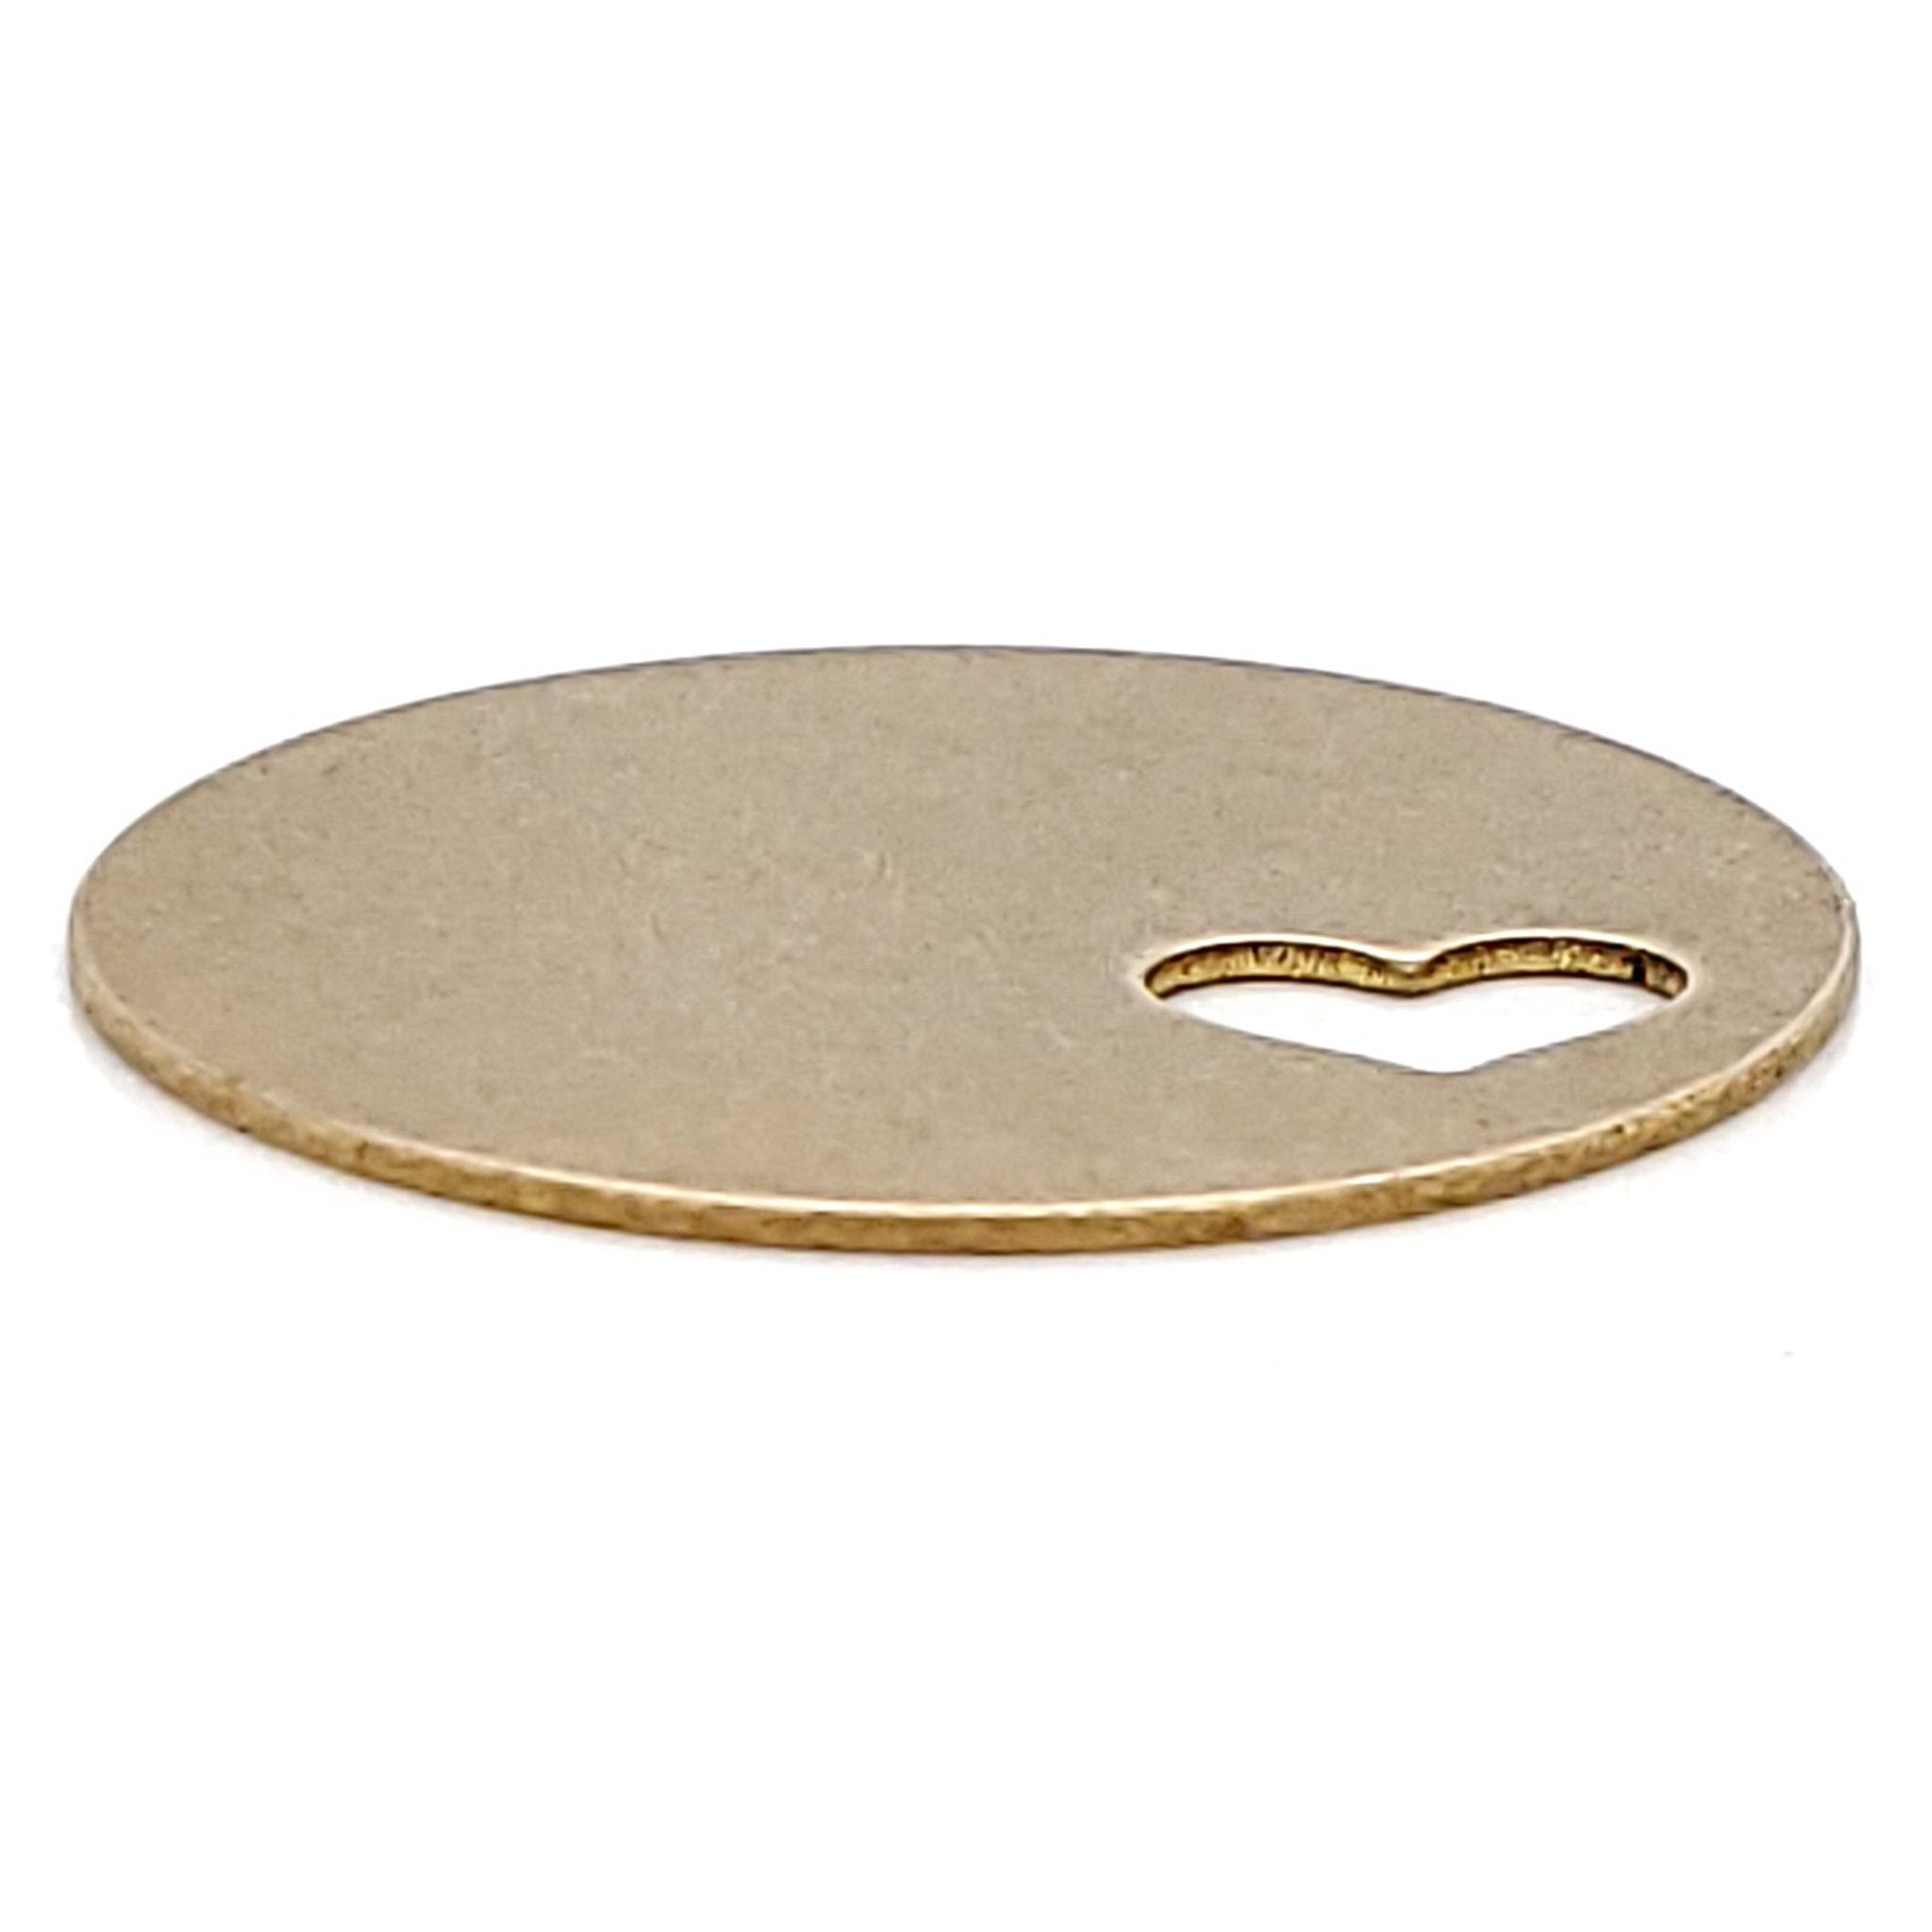 Brass blank round heart cutout pendant at an angle.